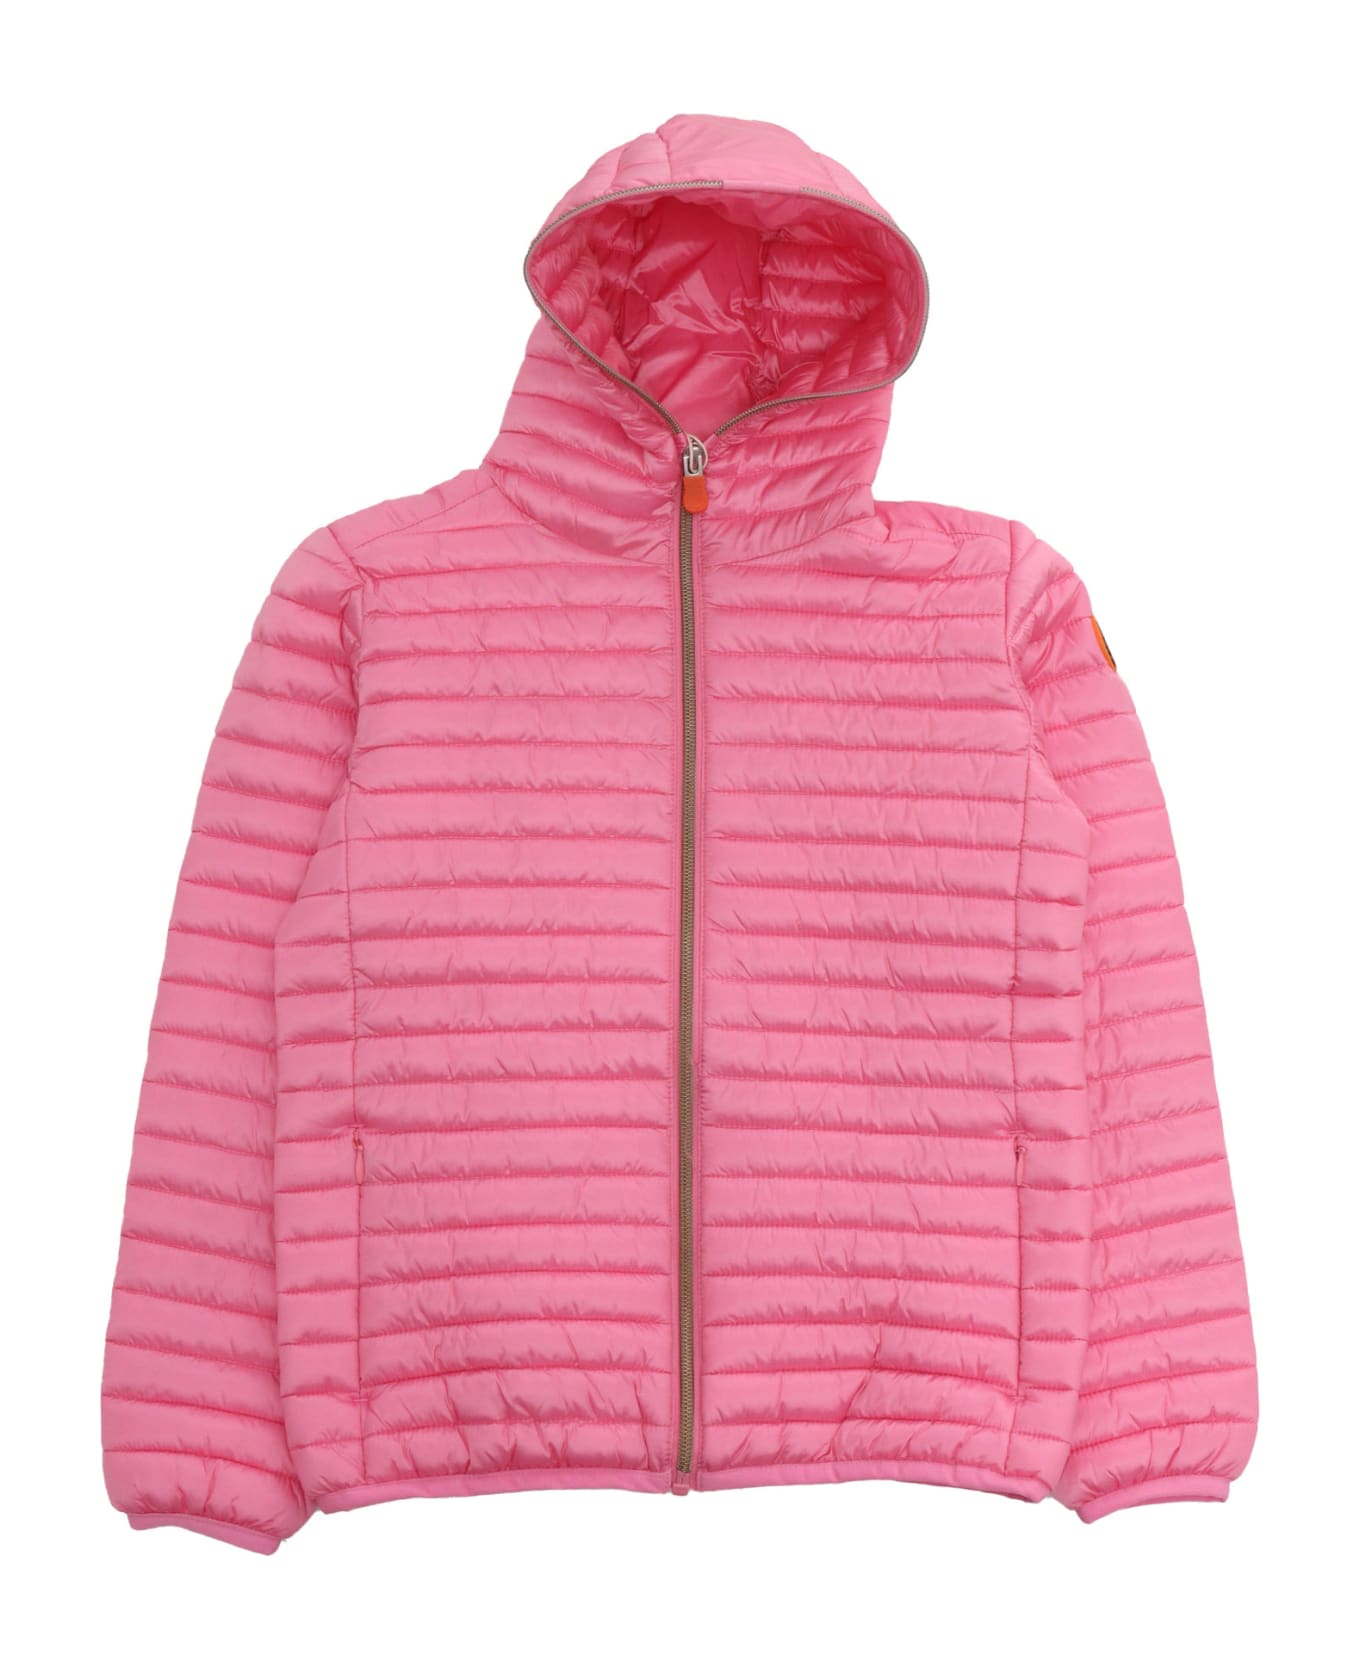 Save the Duck Rosy Pink Down Jacket - PINK